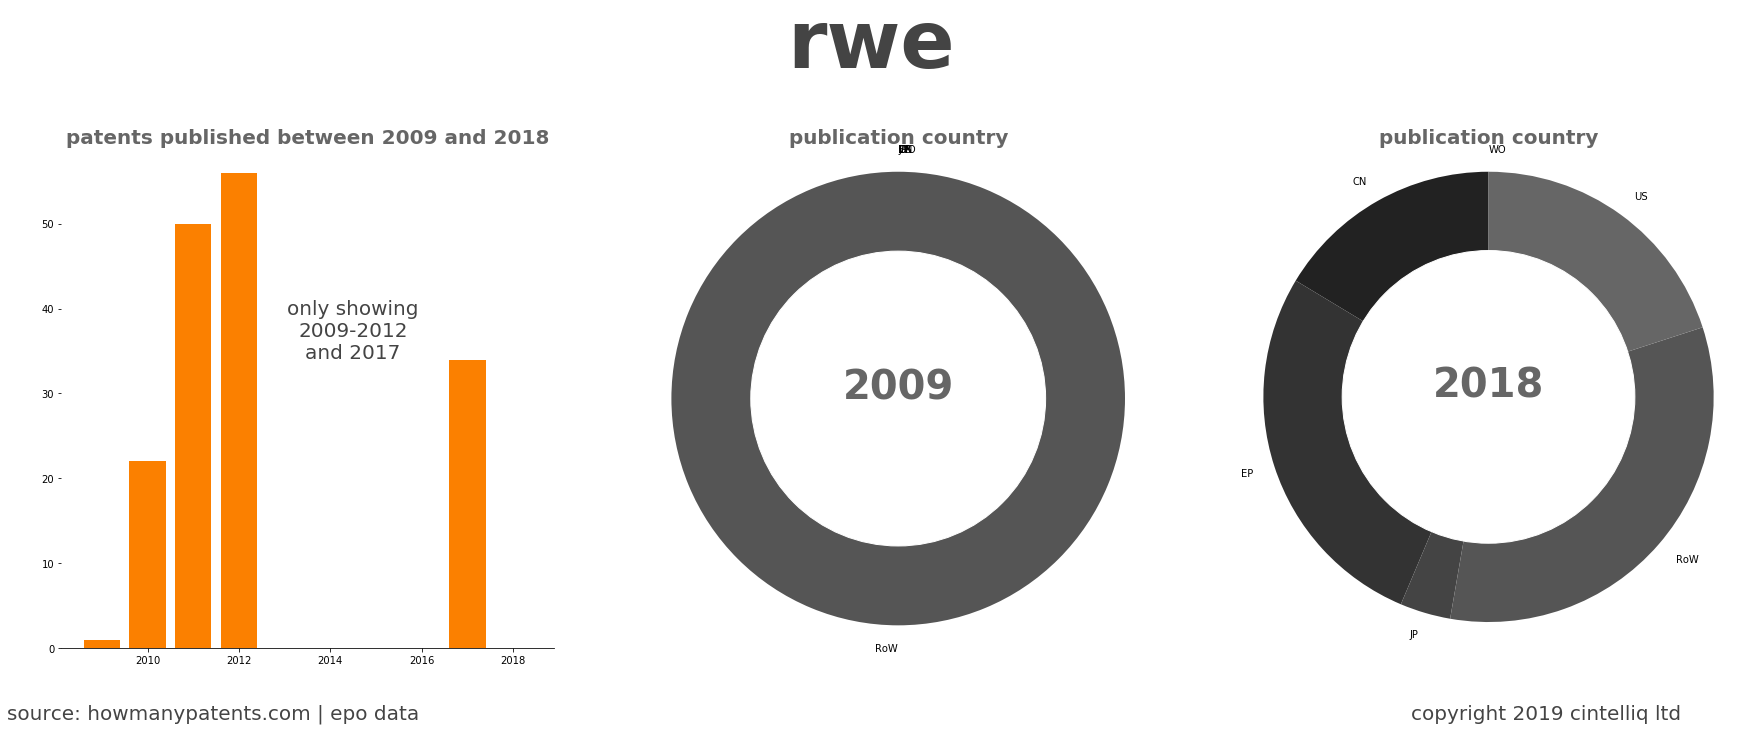 summary of patents for Rwe